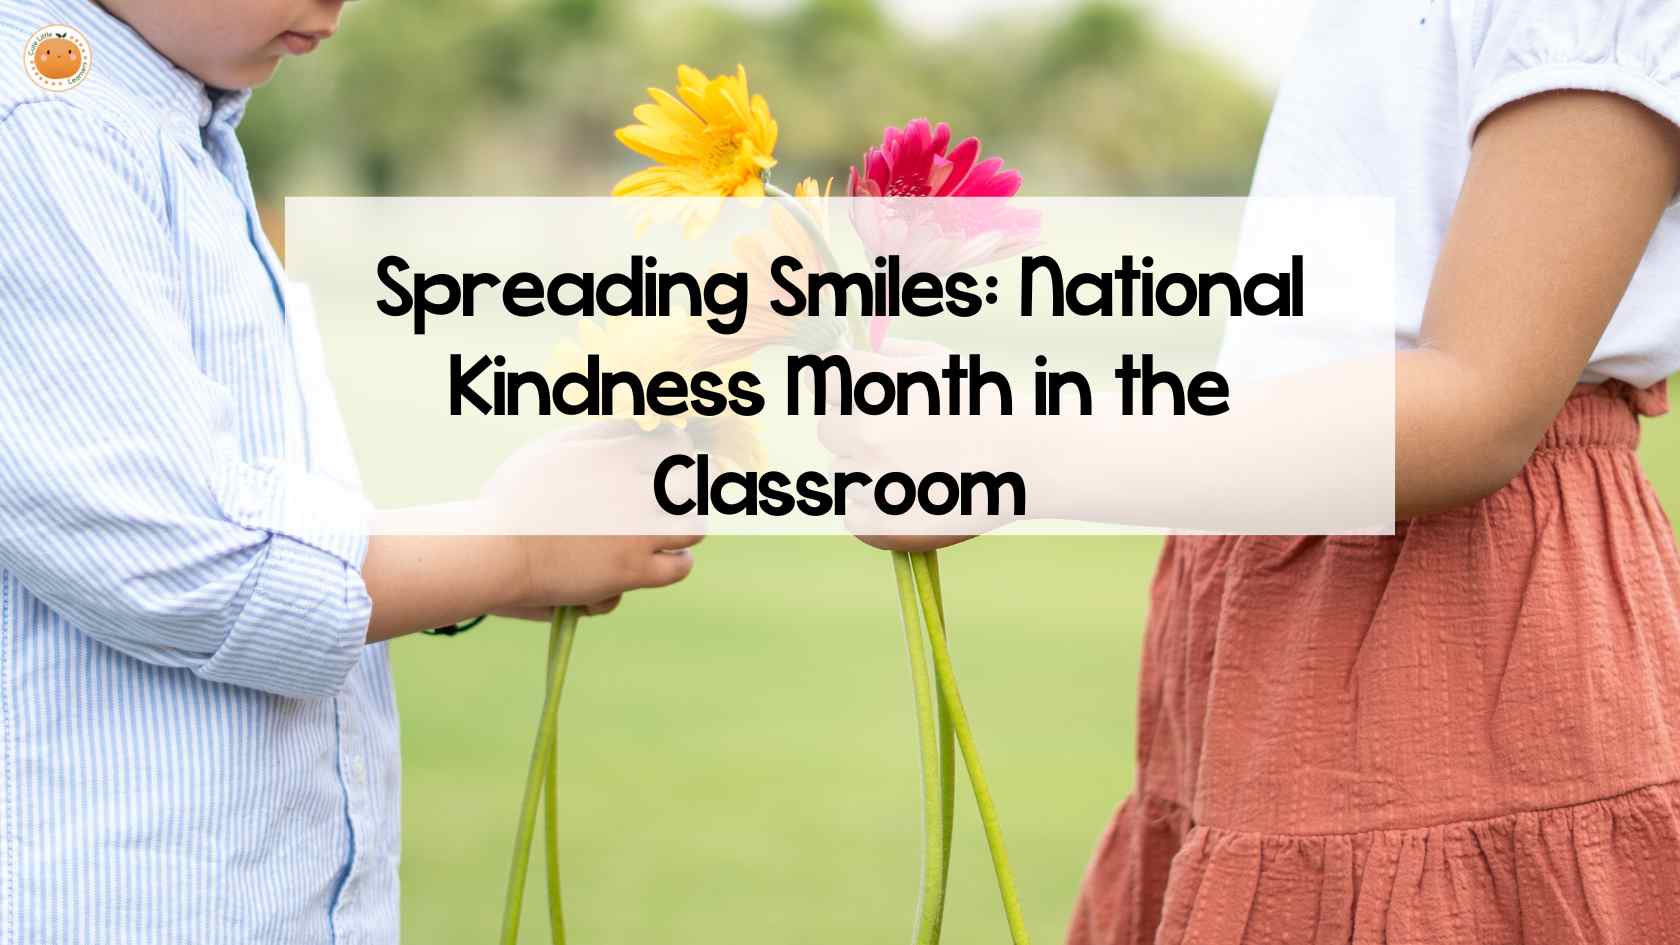 Spreading Smiles: National Kindness Month in the Classroom